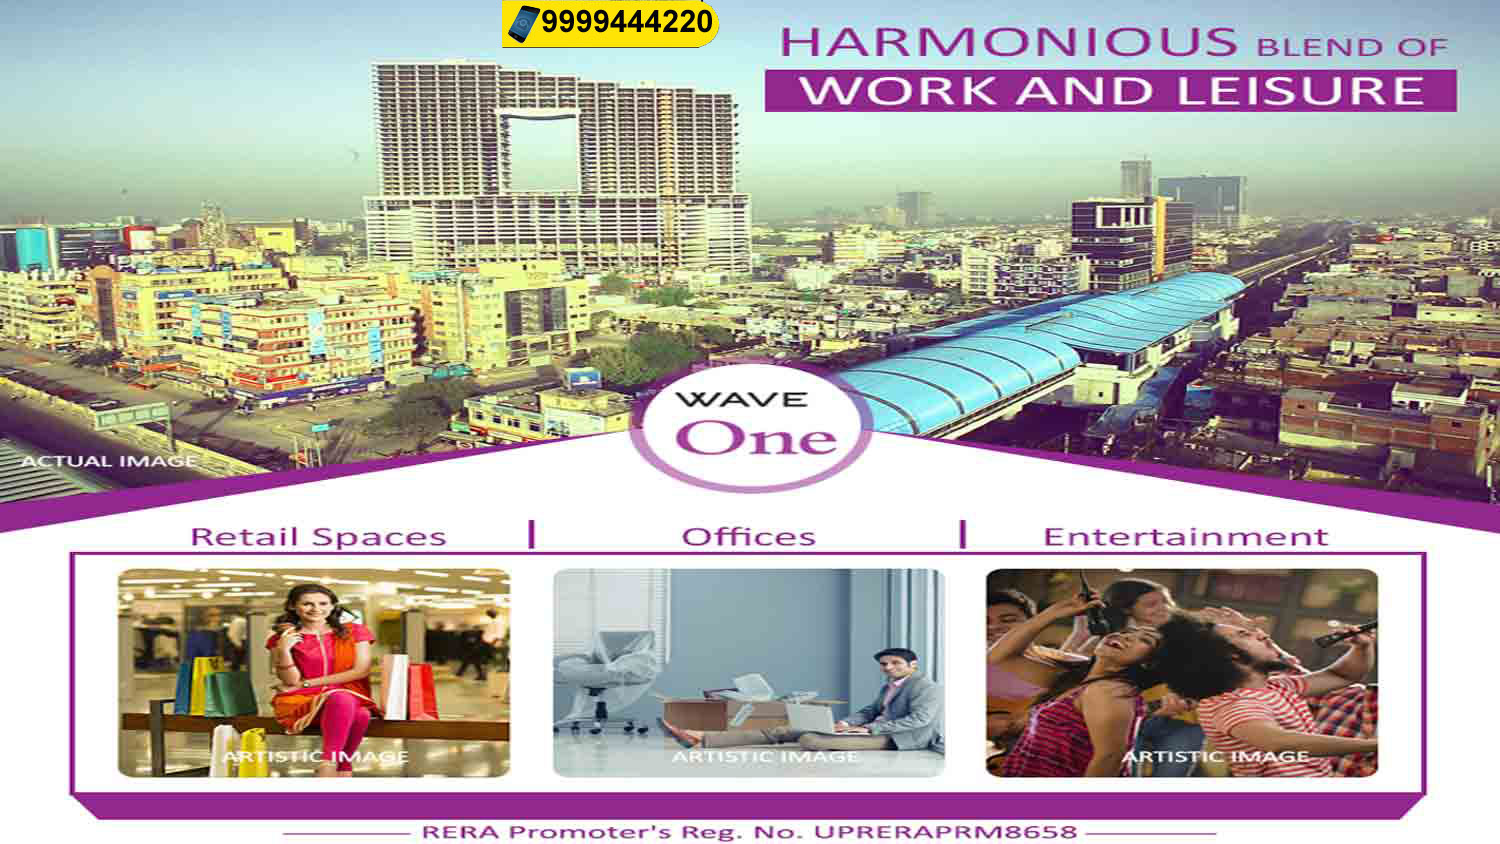 Wave One Noida with Premium Specifications as iconic office Spaces